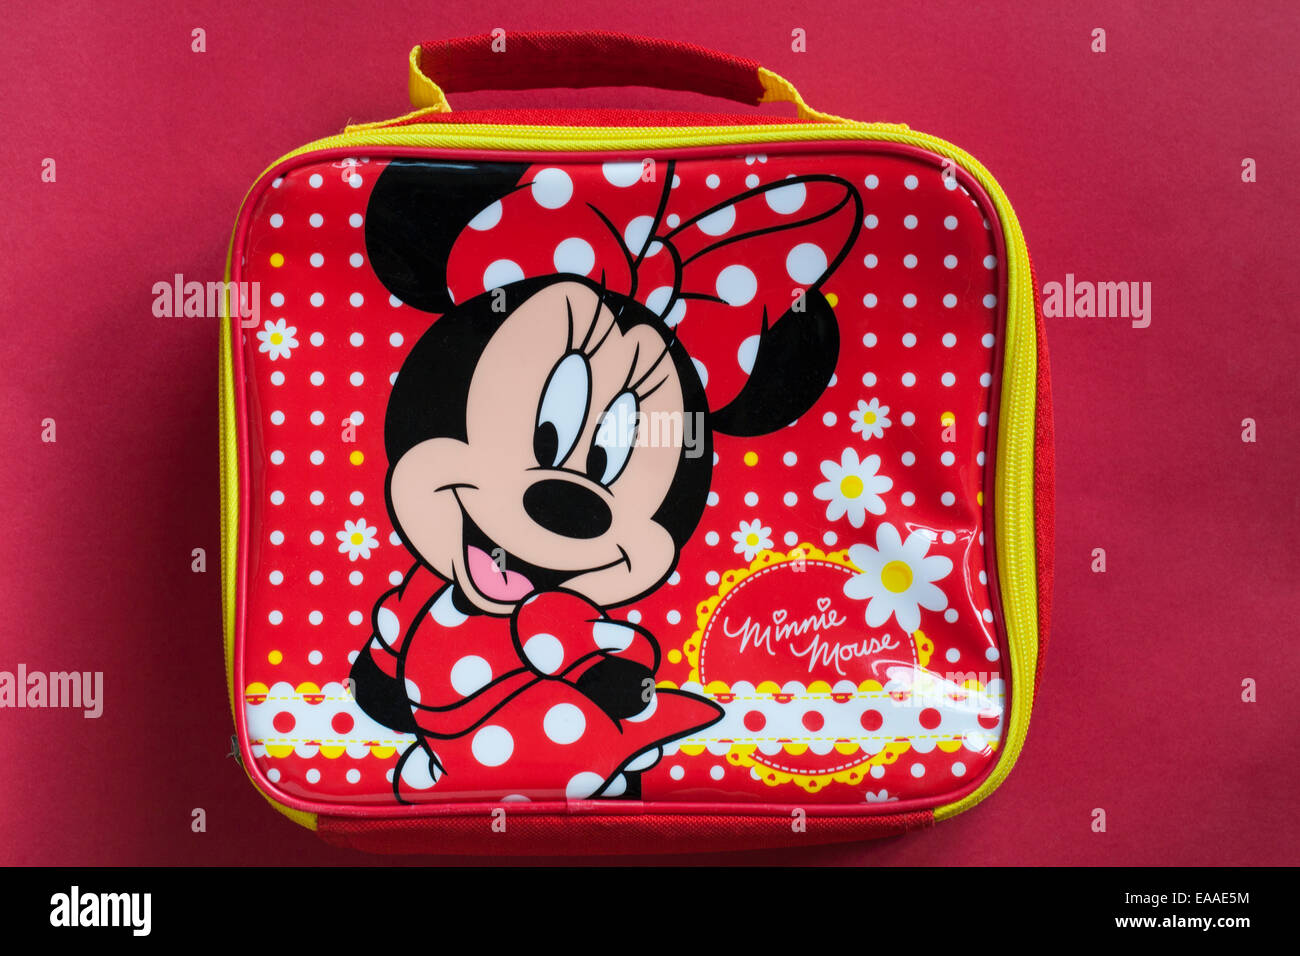 Minnie Mouse child's bag lunch box set on red background Stock Photo